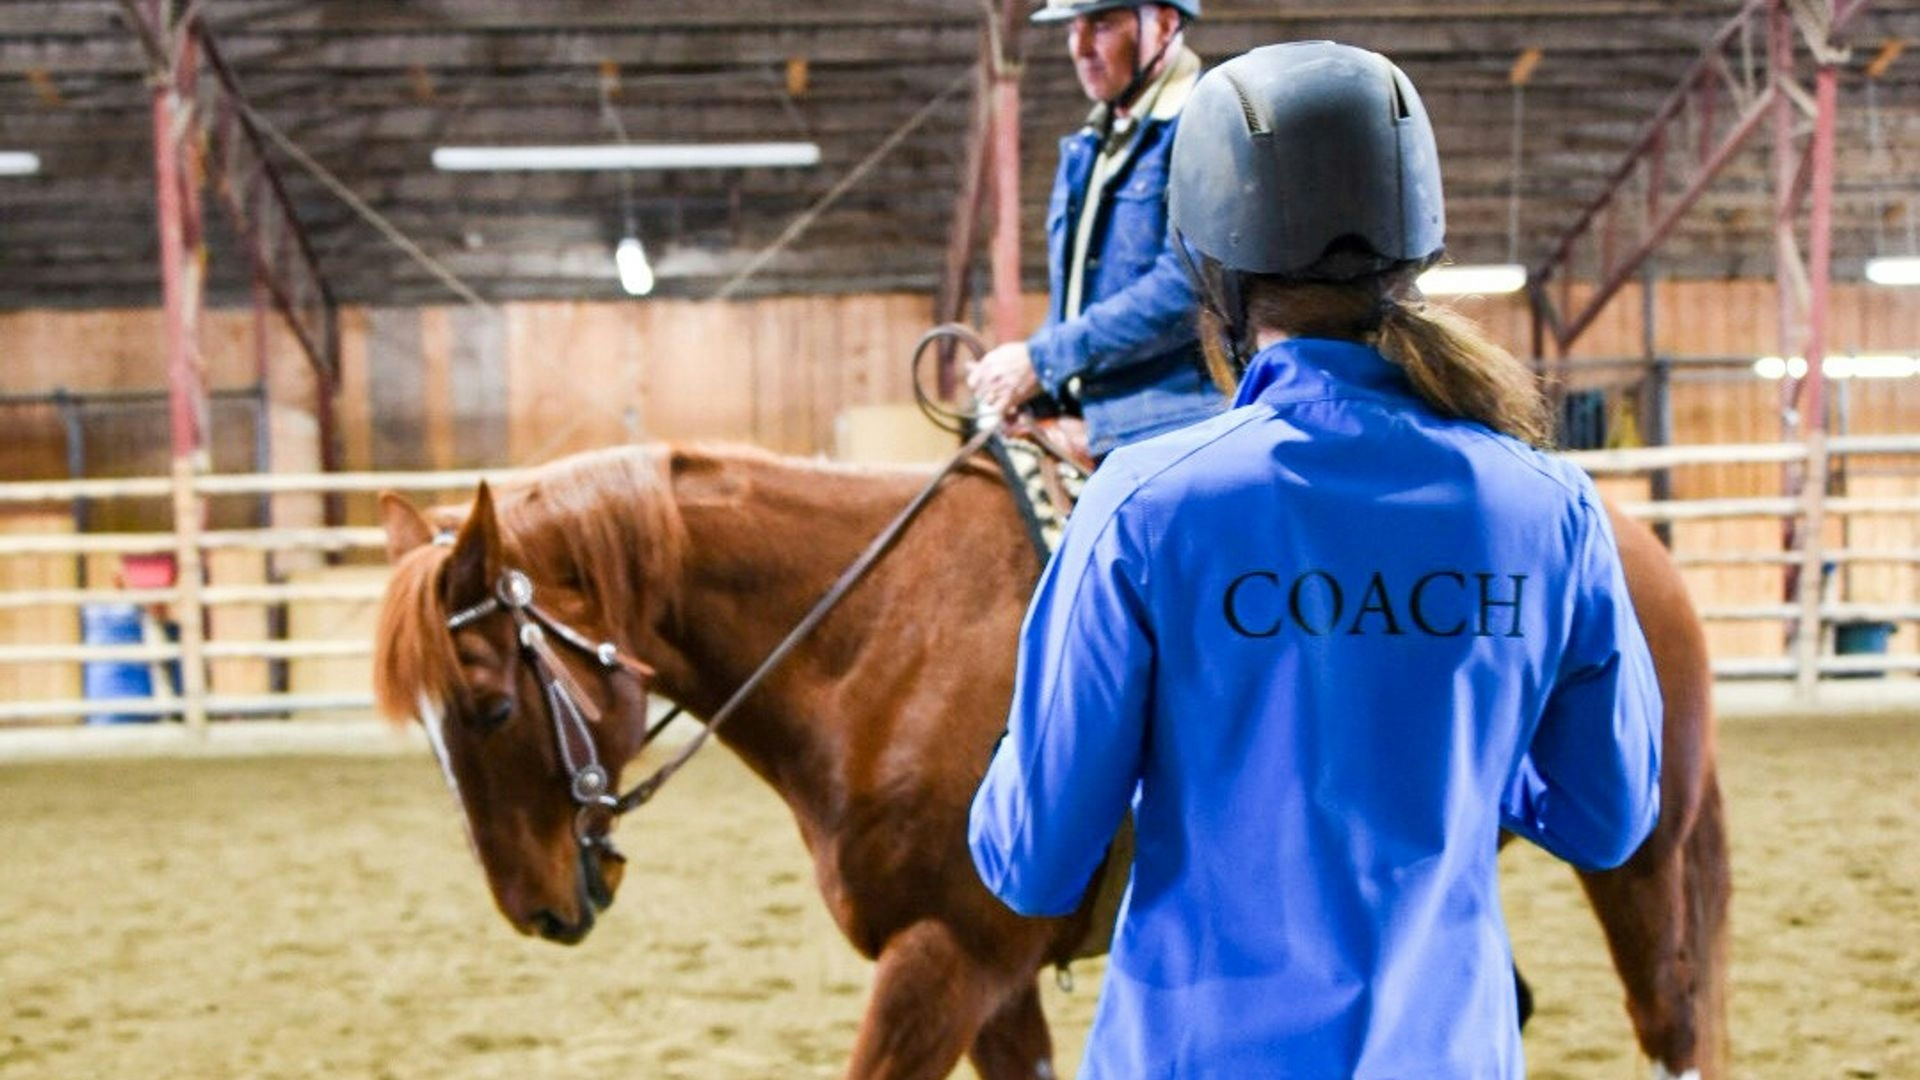 An instructor stands in the foreground as a mature male student rides a chestnut horse.